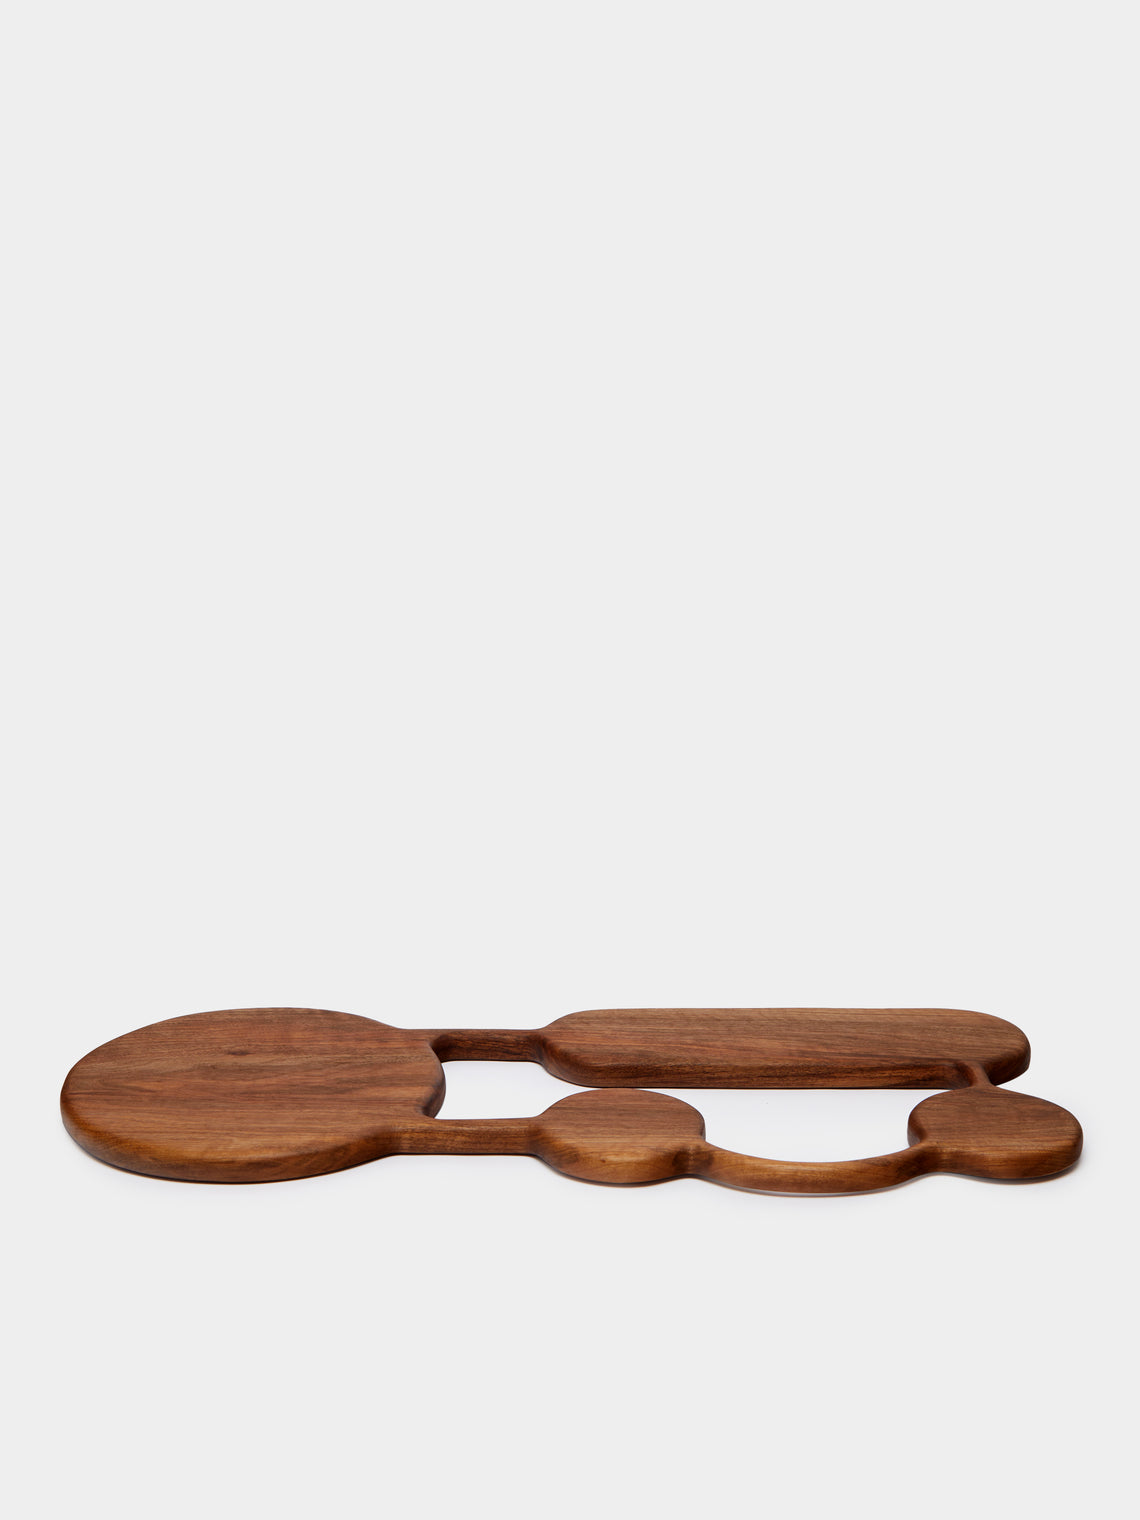 Lucas Castex - No. 6 Hand-Carved Oiled Walnut Serving Board -  - ABASK